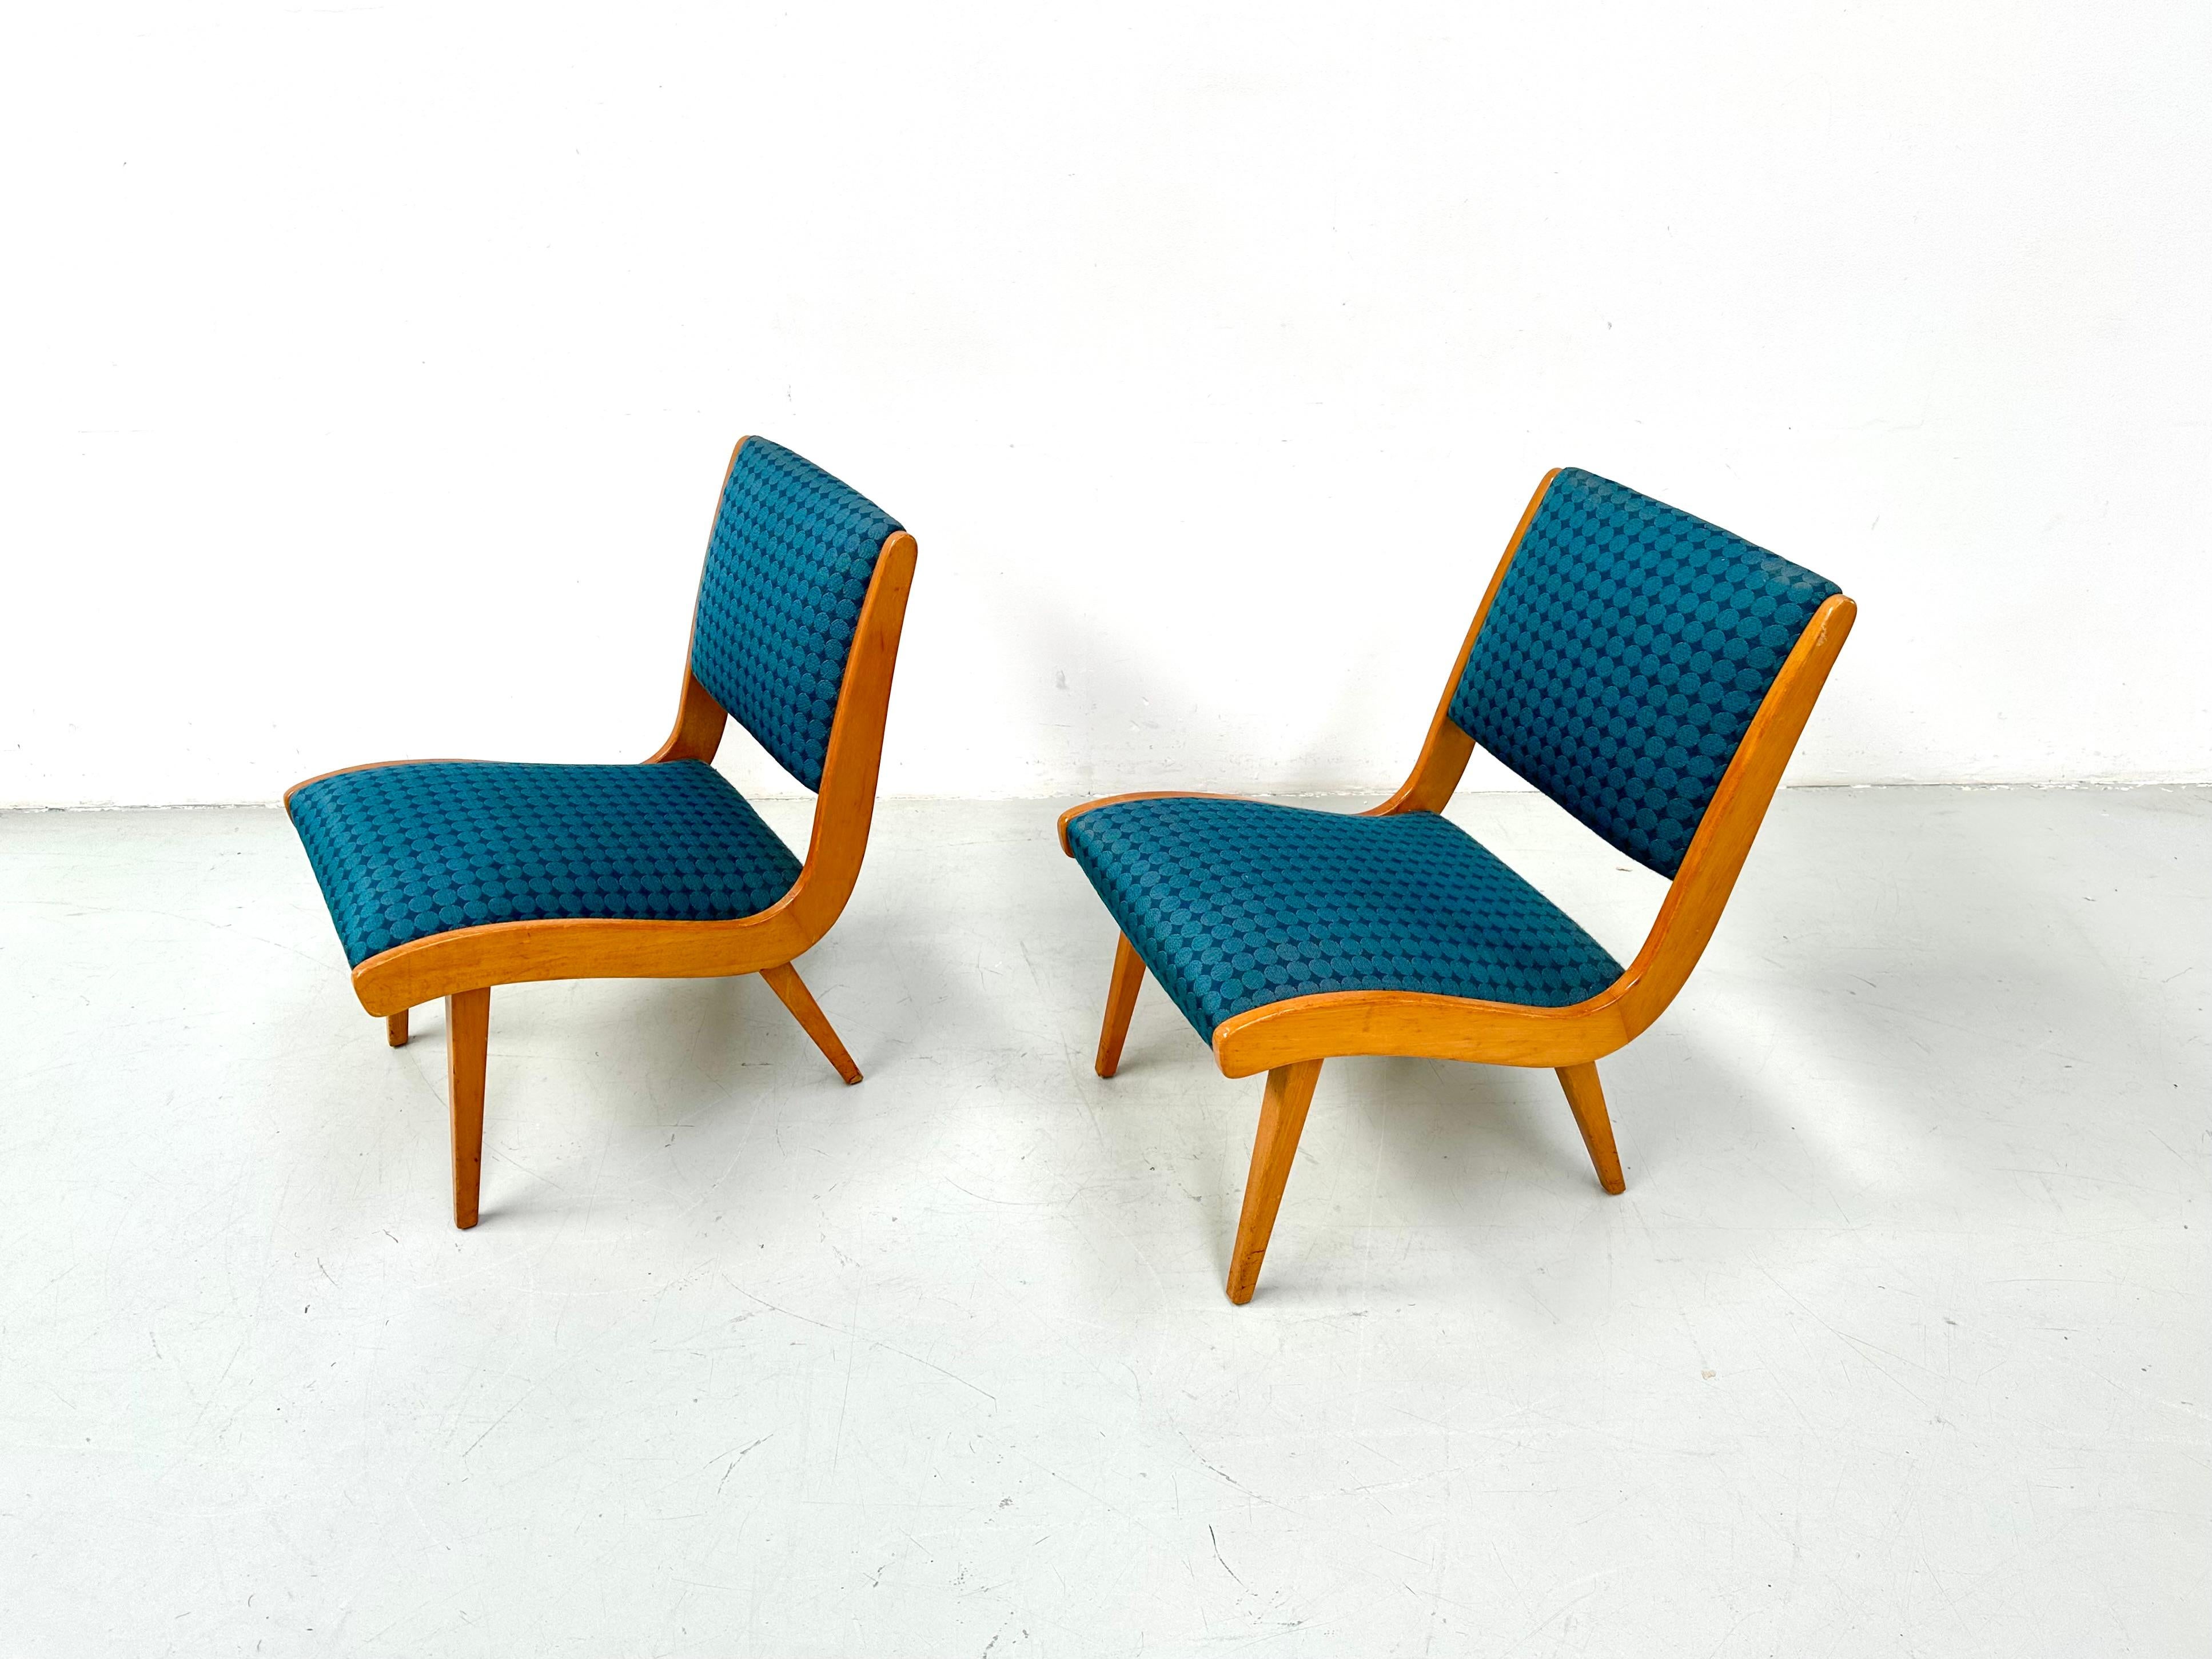 1950s Rare Set Vostra Chairs Numbered & Original Fabric by Jens Risom for Knoll. en vente 13